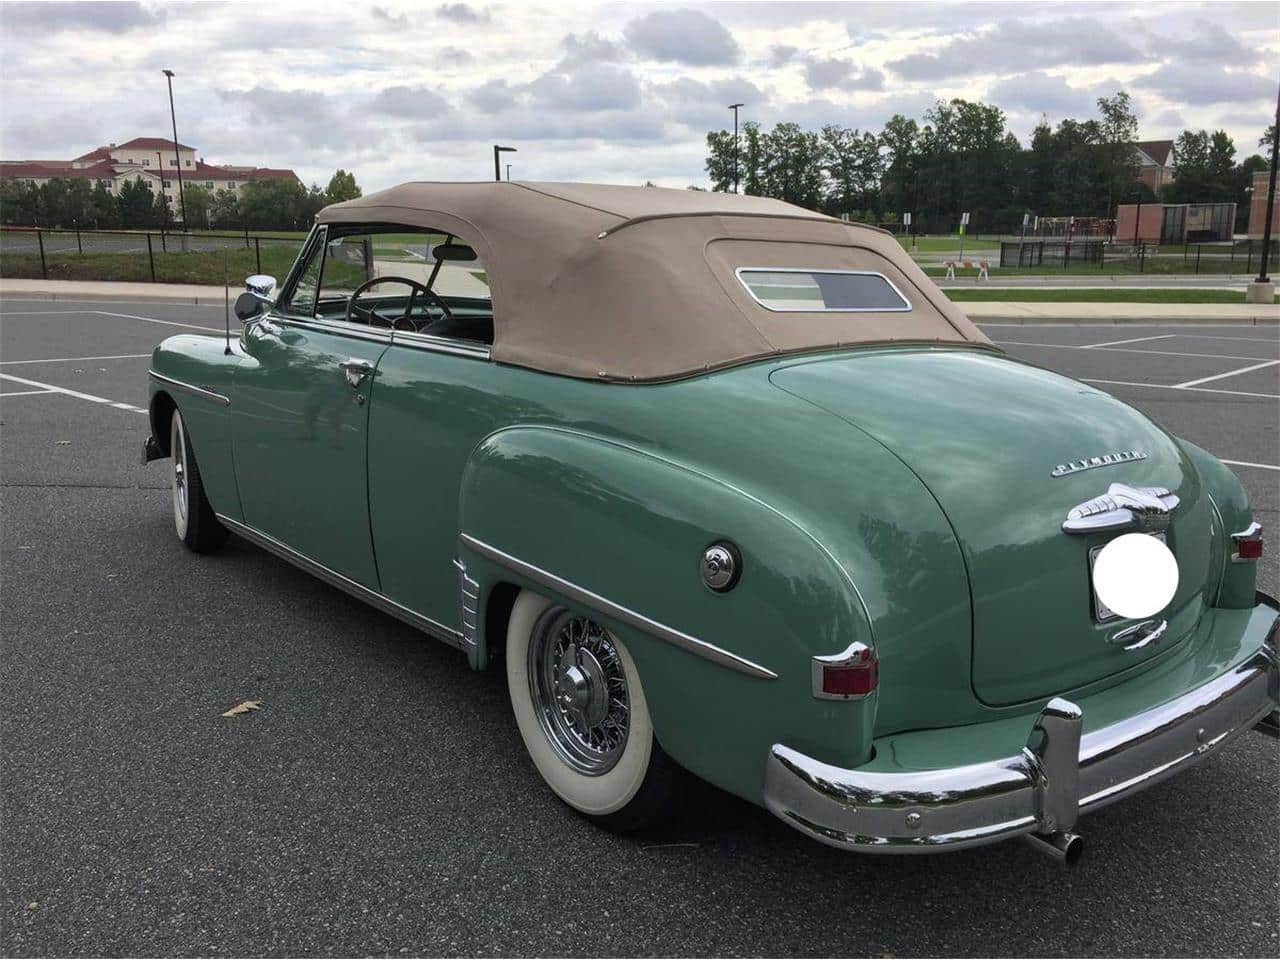 1950 plymouth special deluxe convertible, Pick of the Day: 1950 Plymouth Special Deluxe convertible, ClassicCars.com Journal